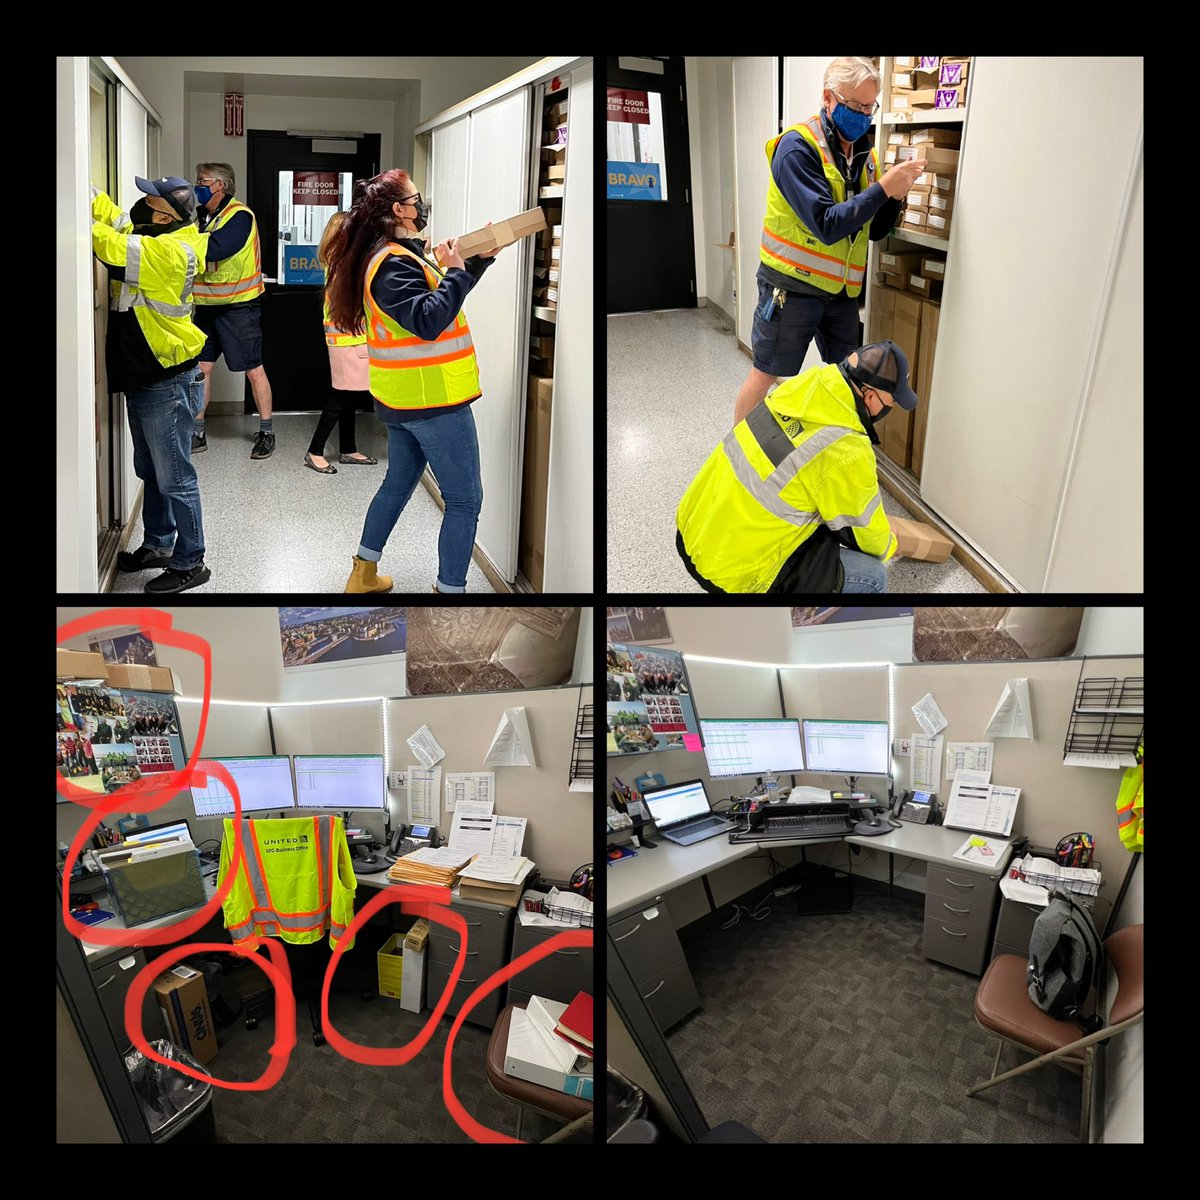 @SfoBusiness making sure our 5S Spring Cleaning is in check!  Office cubicles ✅ CS PAX supplies ✅ @Auggiie69 @vjpassa @NeumannCatalani @AOSafetyUAL #BeingUnited #safetyiownit #spring5Scompetition